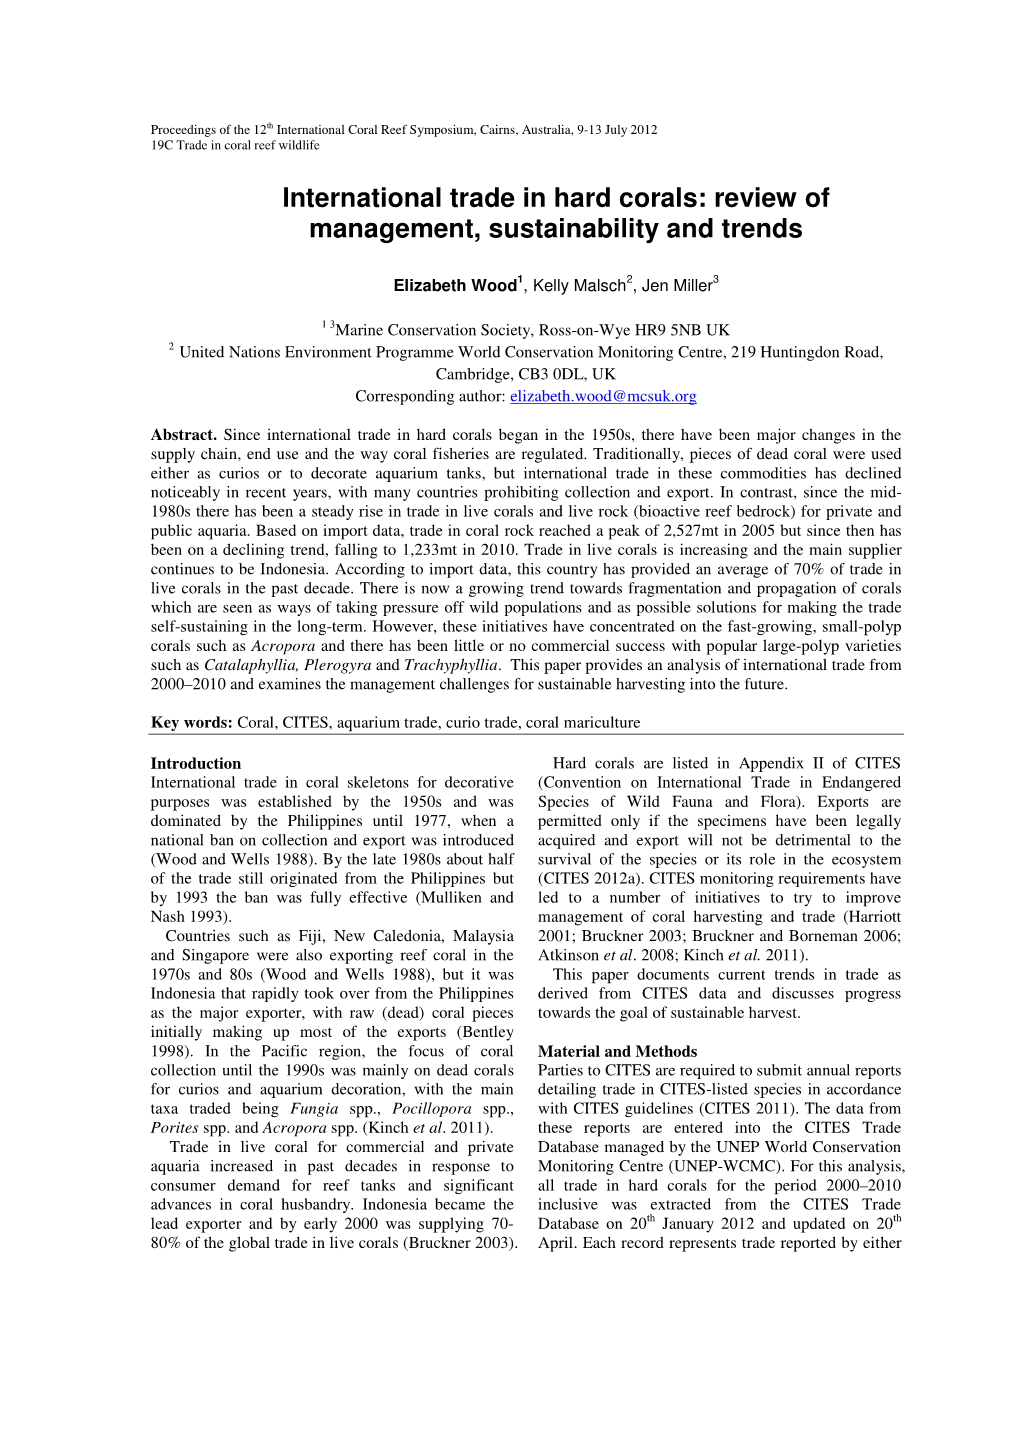 International Trade in Hard Corals: Review of Management, Sustainability and Trends